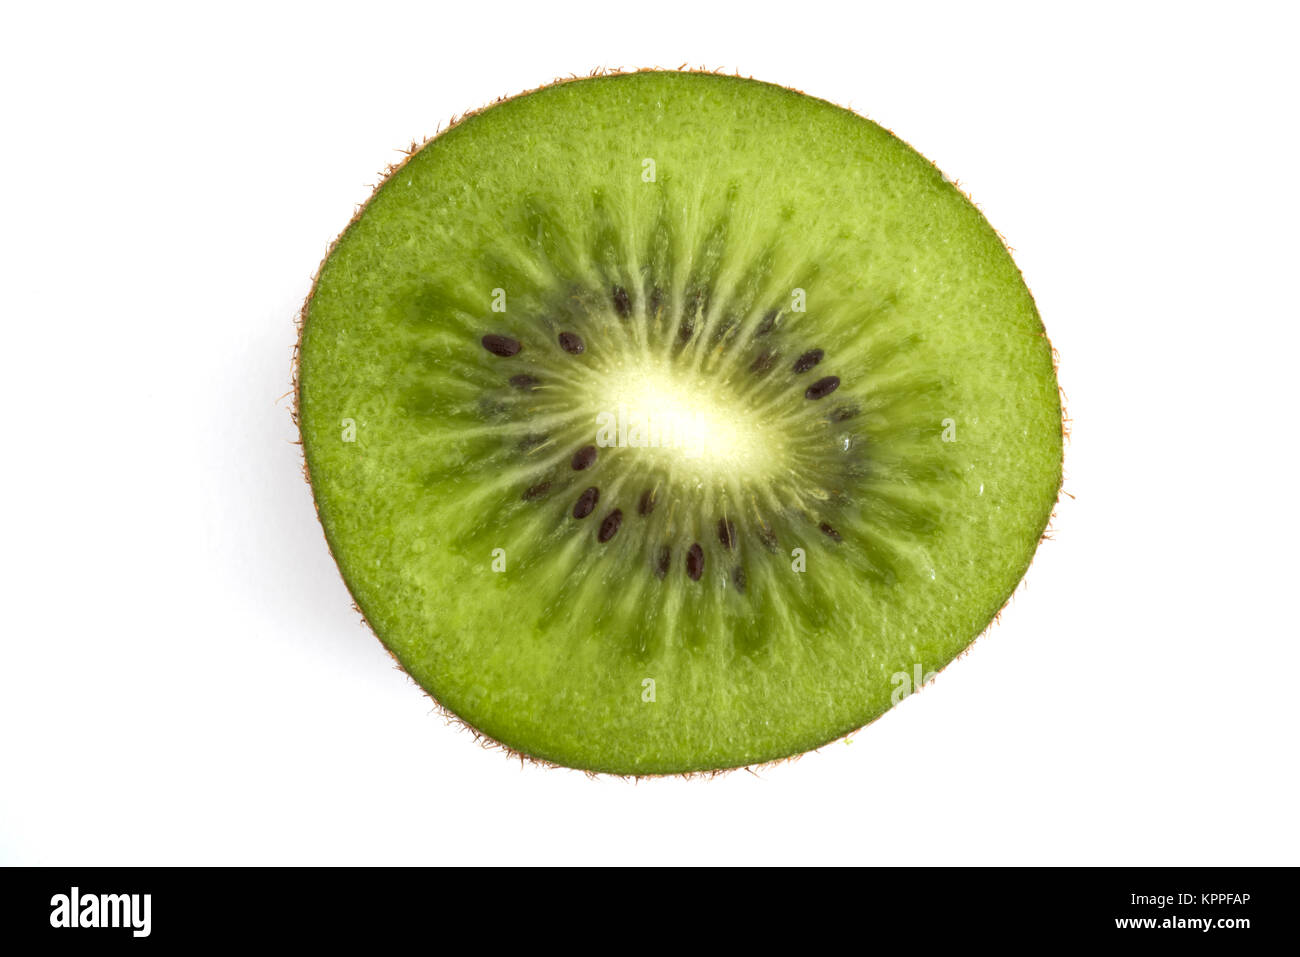 Macro view of a Kiwi fruit cut in half isolated on white background Stock Photo